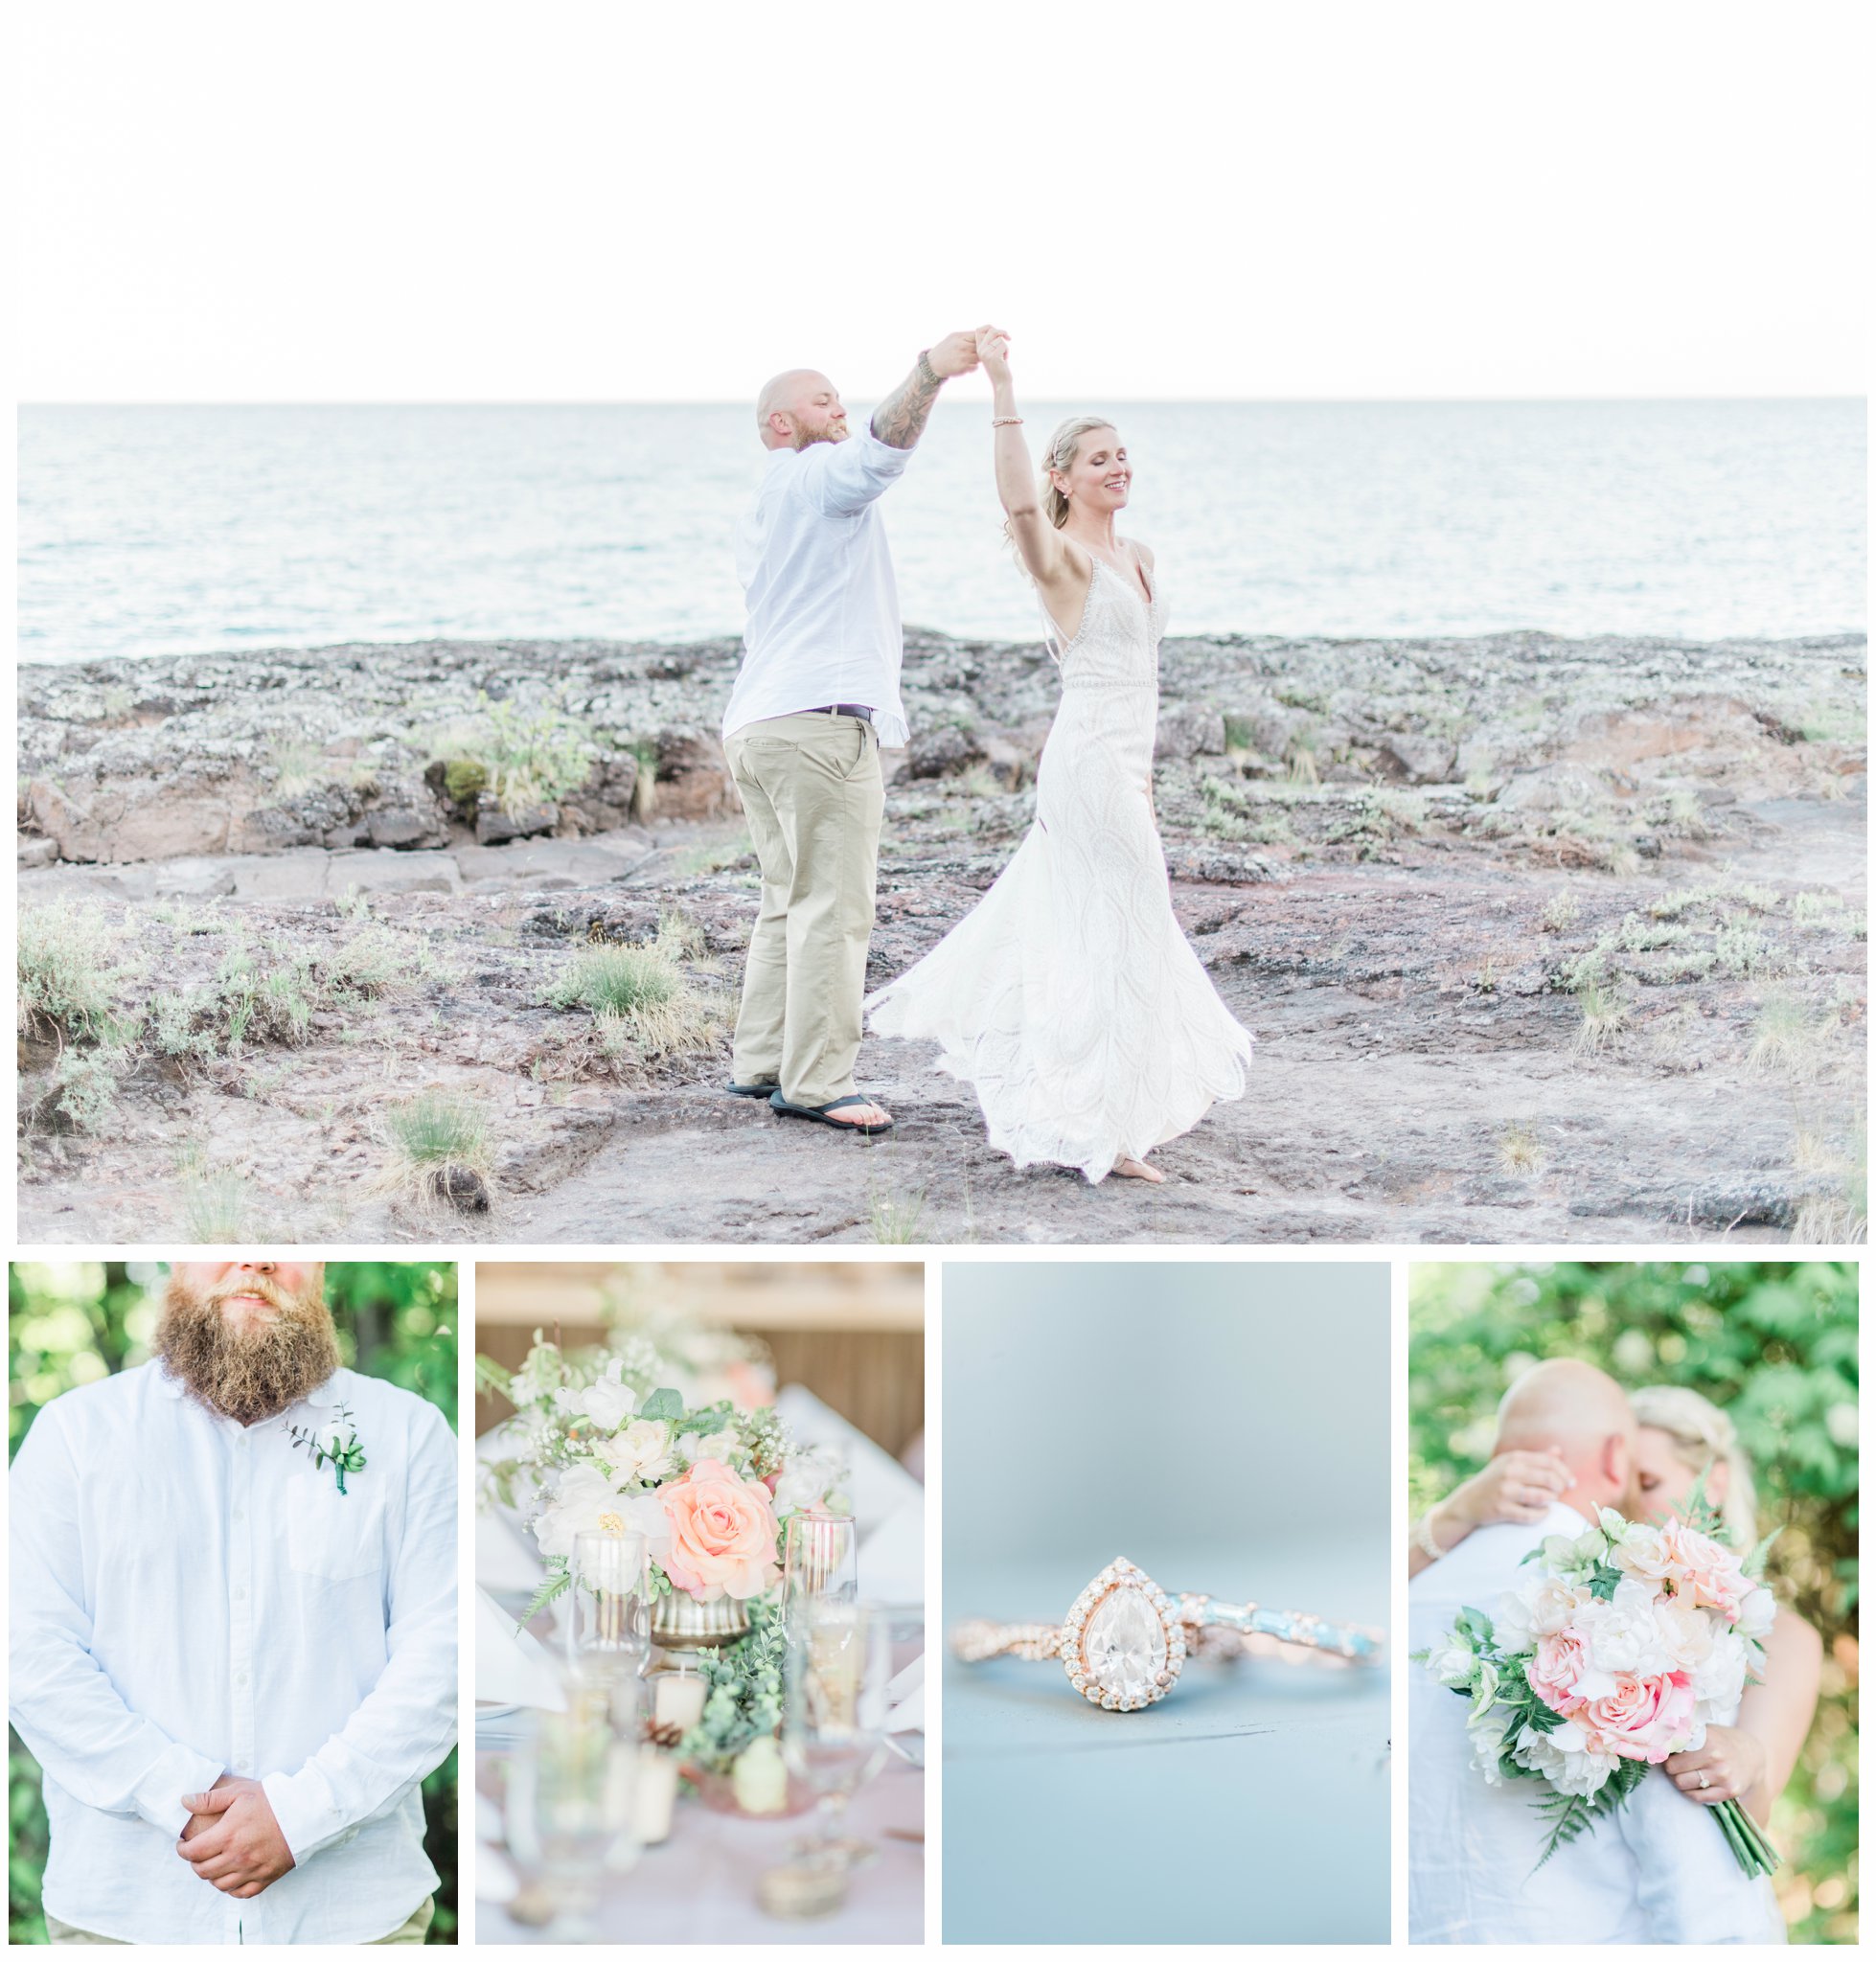 Collage from a summer Bluefin Bay Wedding. Includes bride and groom as well as their details: Ring, bouquet, and boutonnière. Photo by Kayla Lee.